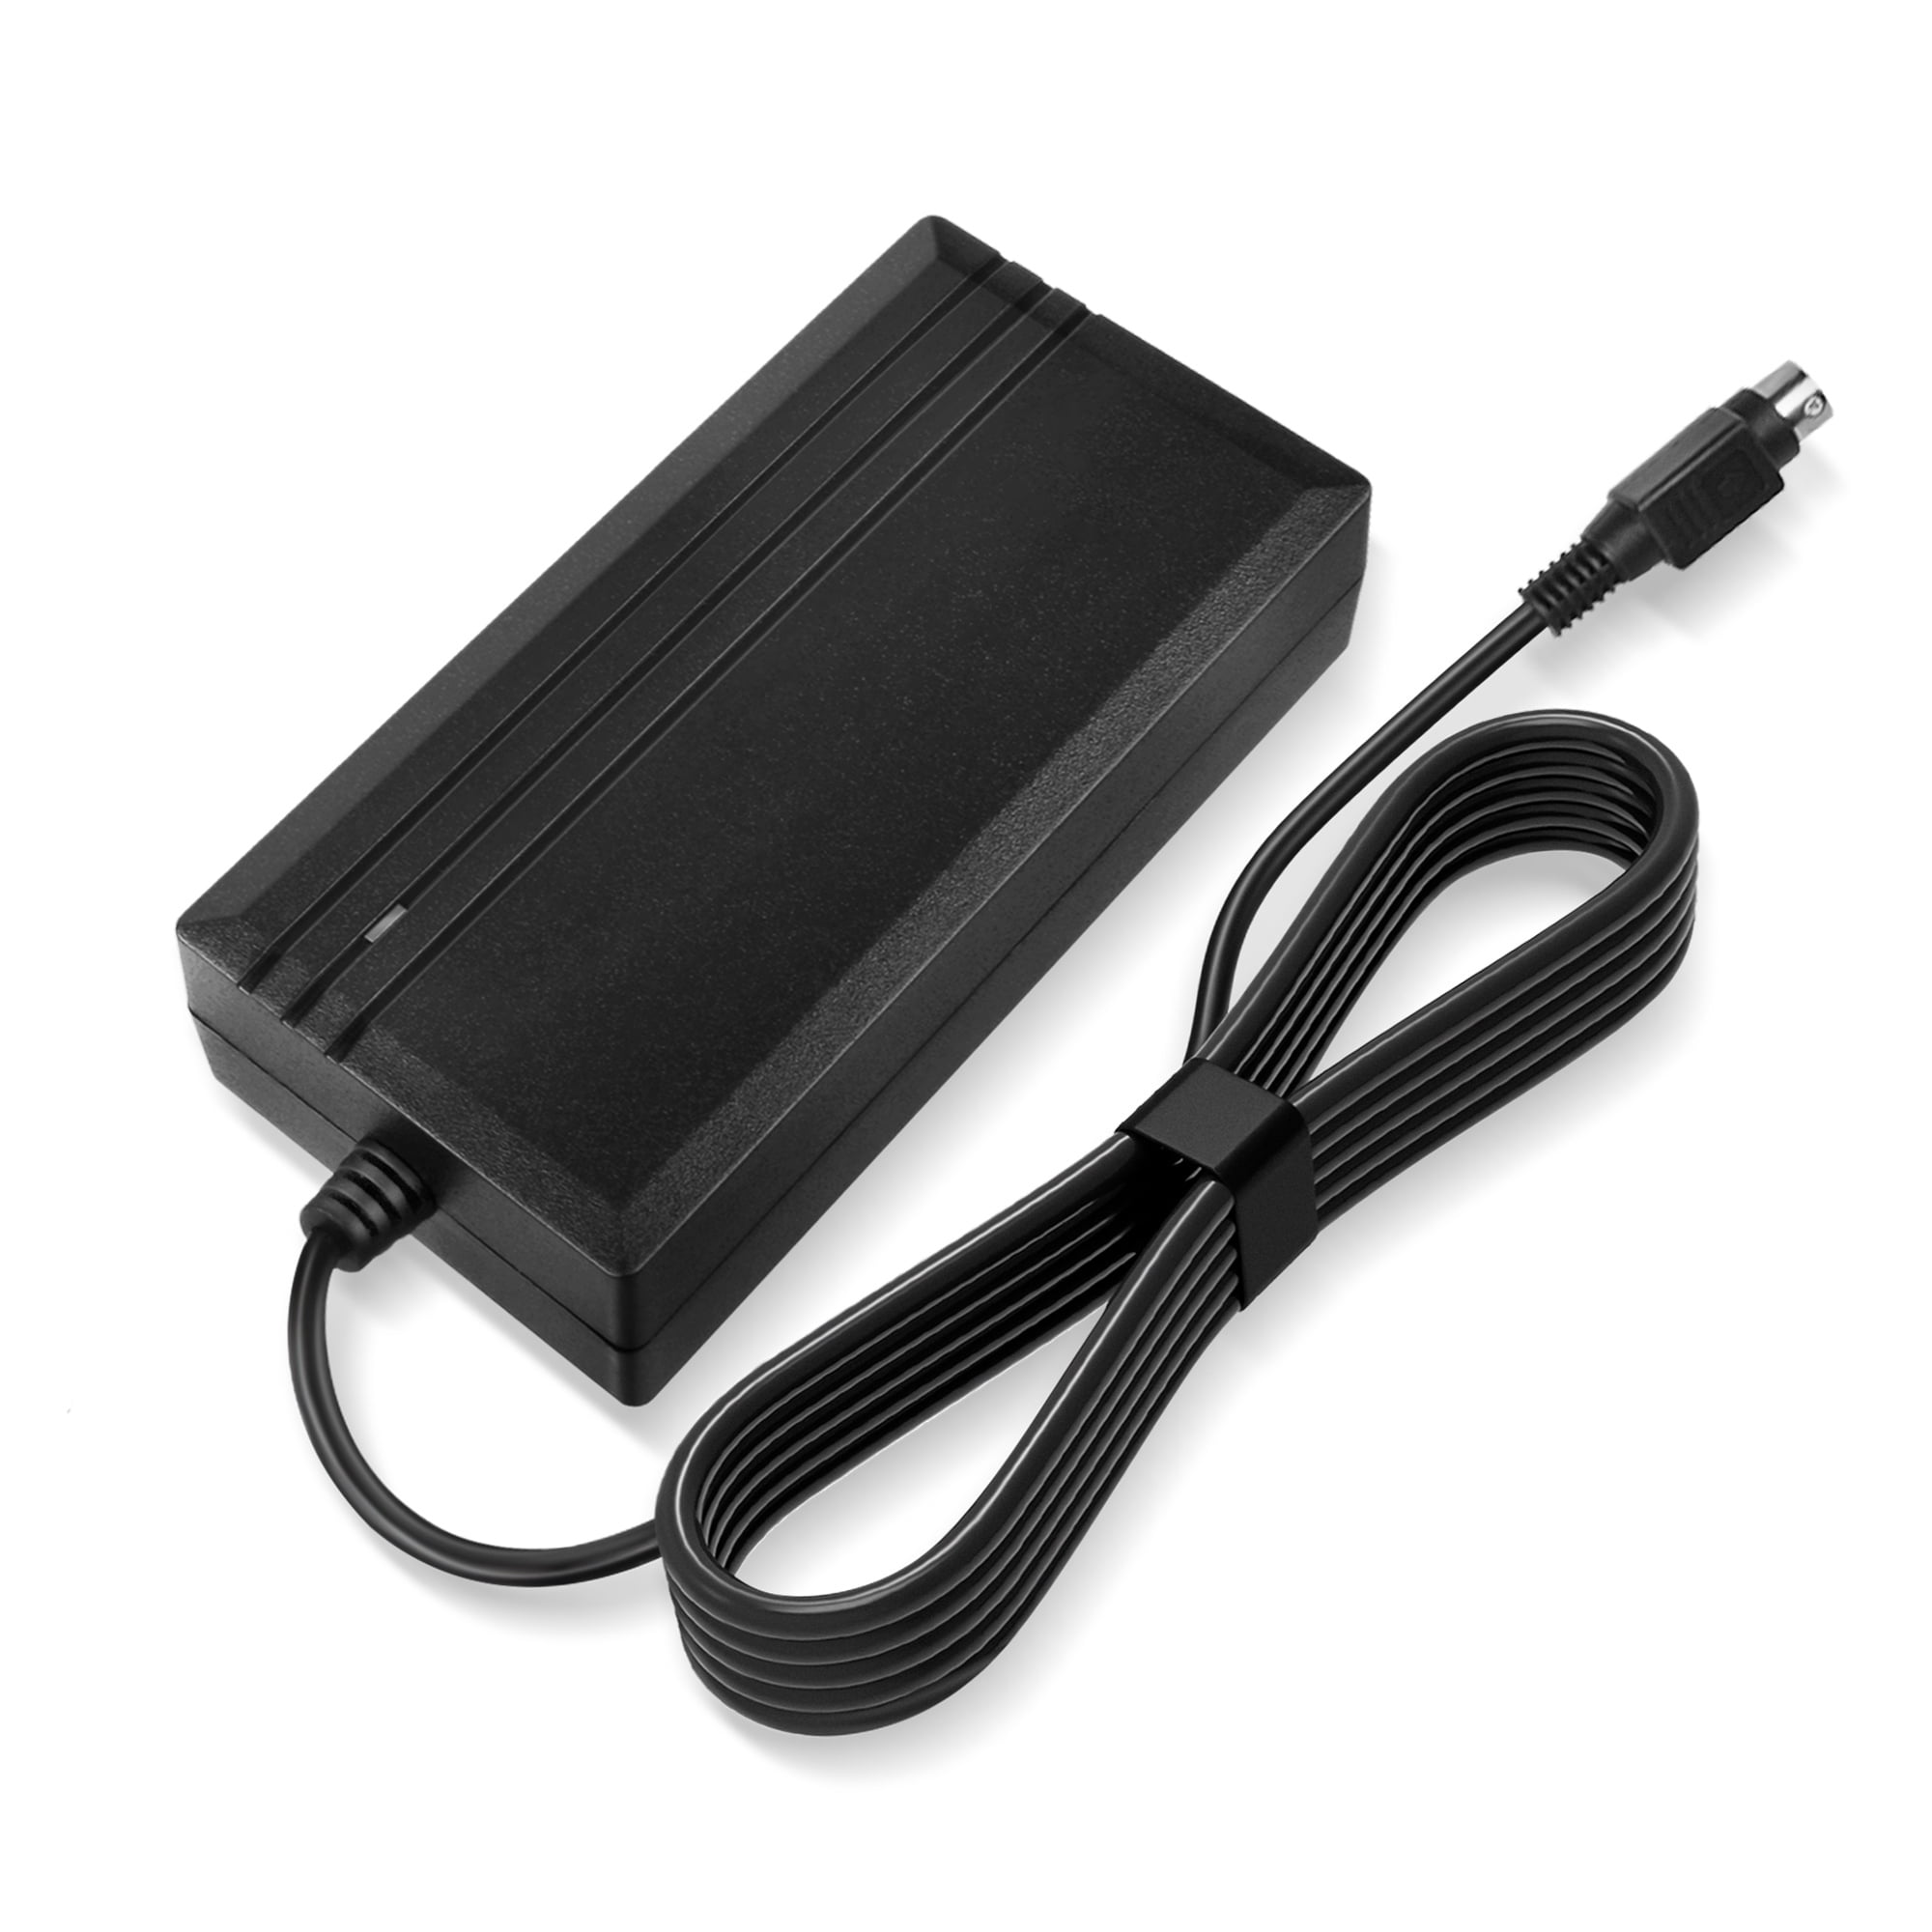 udredning Presenter rense PKPOWER 4-Pin DIN 12V AC DC Adapter For Stiger ST-C-090-12000700CT ST-C-084-12000700CT  STC-090-12000700CT STC-084-12000700CT STC09012000700CT STC08412000700CT  12VDC 7A 84W (w/ 4-Prong Connector - Walmart.com